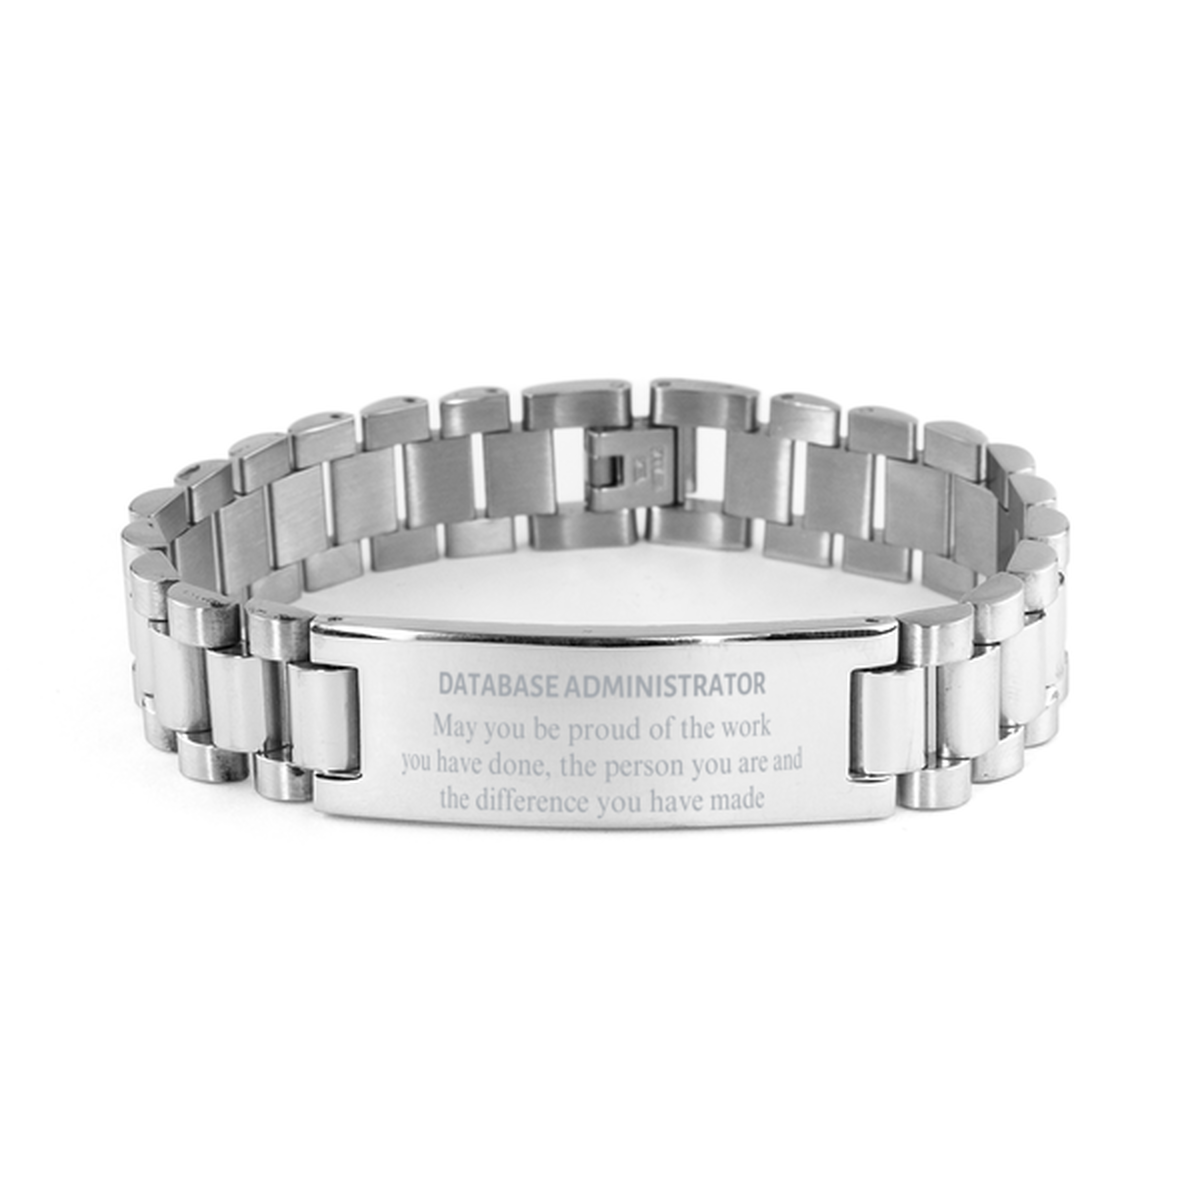 Database Administrator May you be proud of the work you have done, Retirement Database Administrator Ladder Stainless Steel Bracelet for Colleague Appreciation Gifts Amazing for Database Administrator